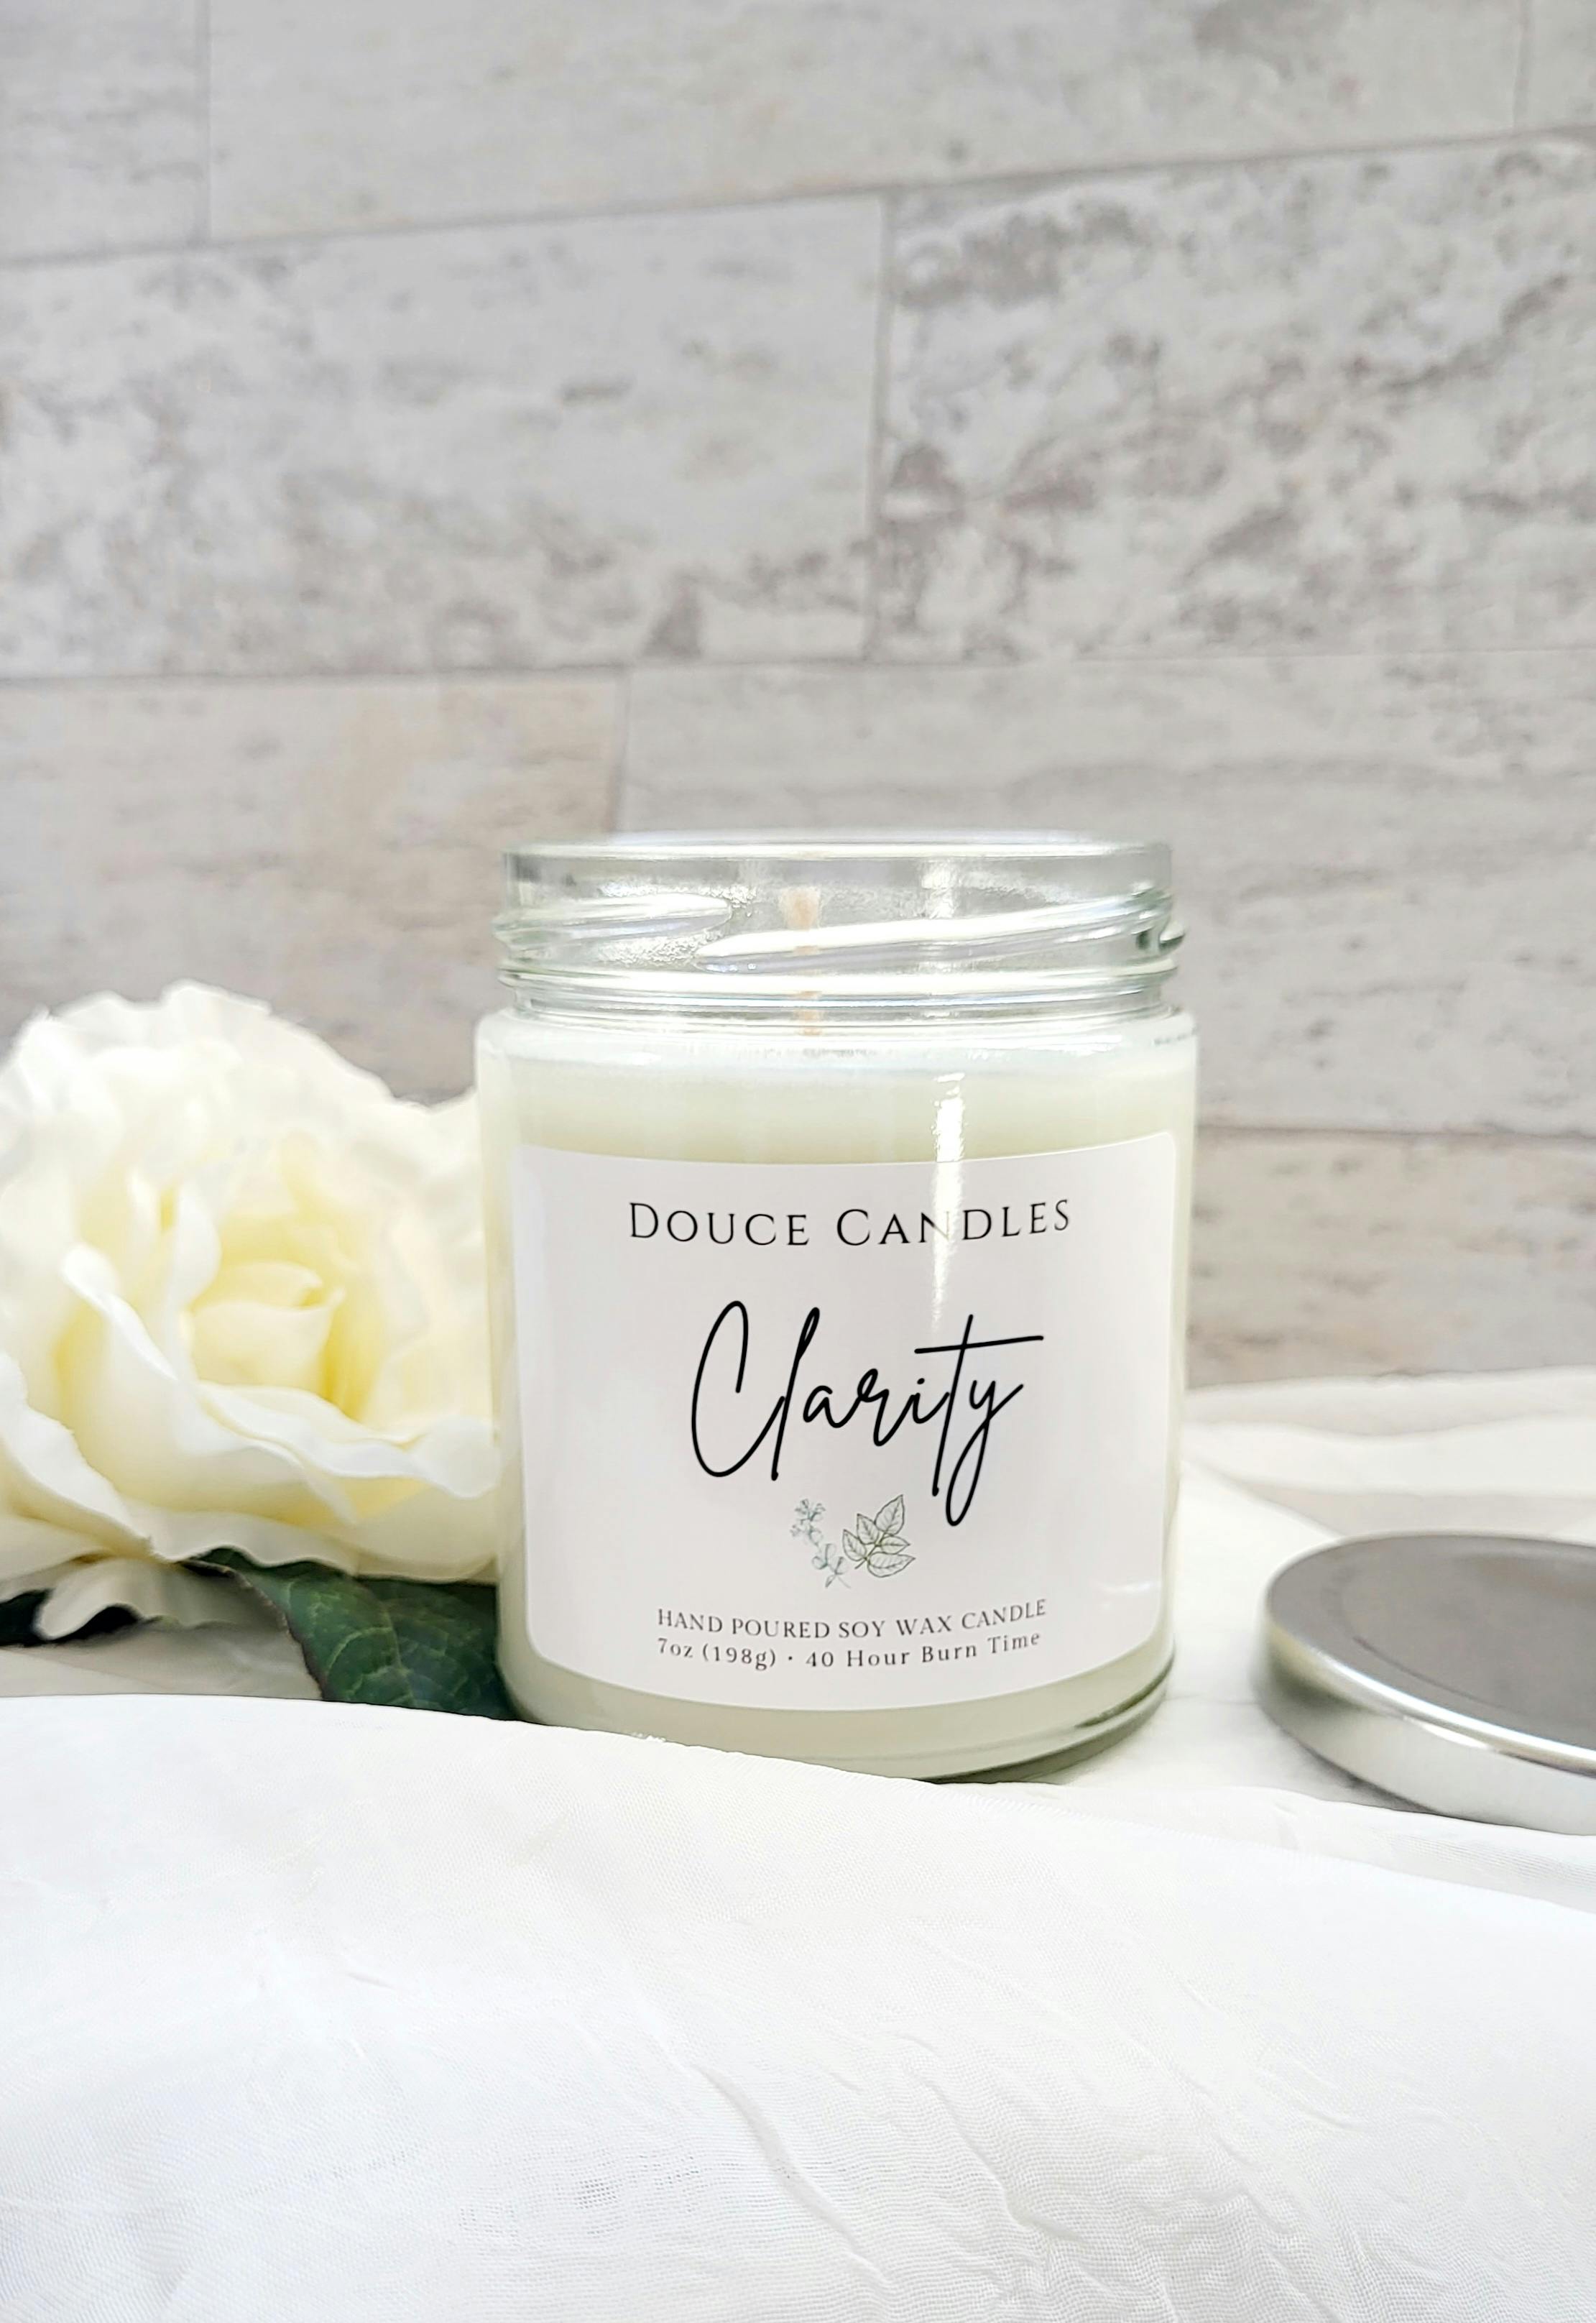 Clarity Candle